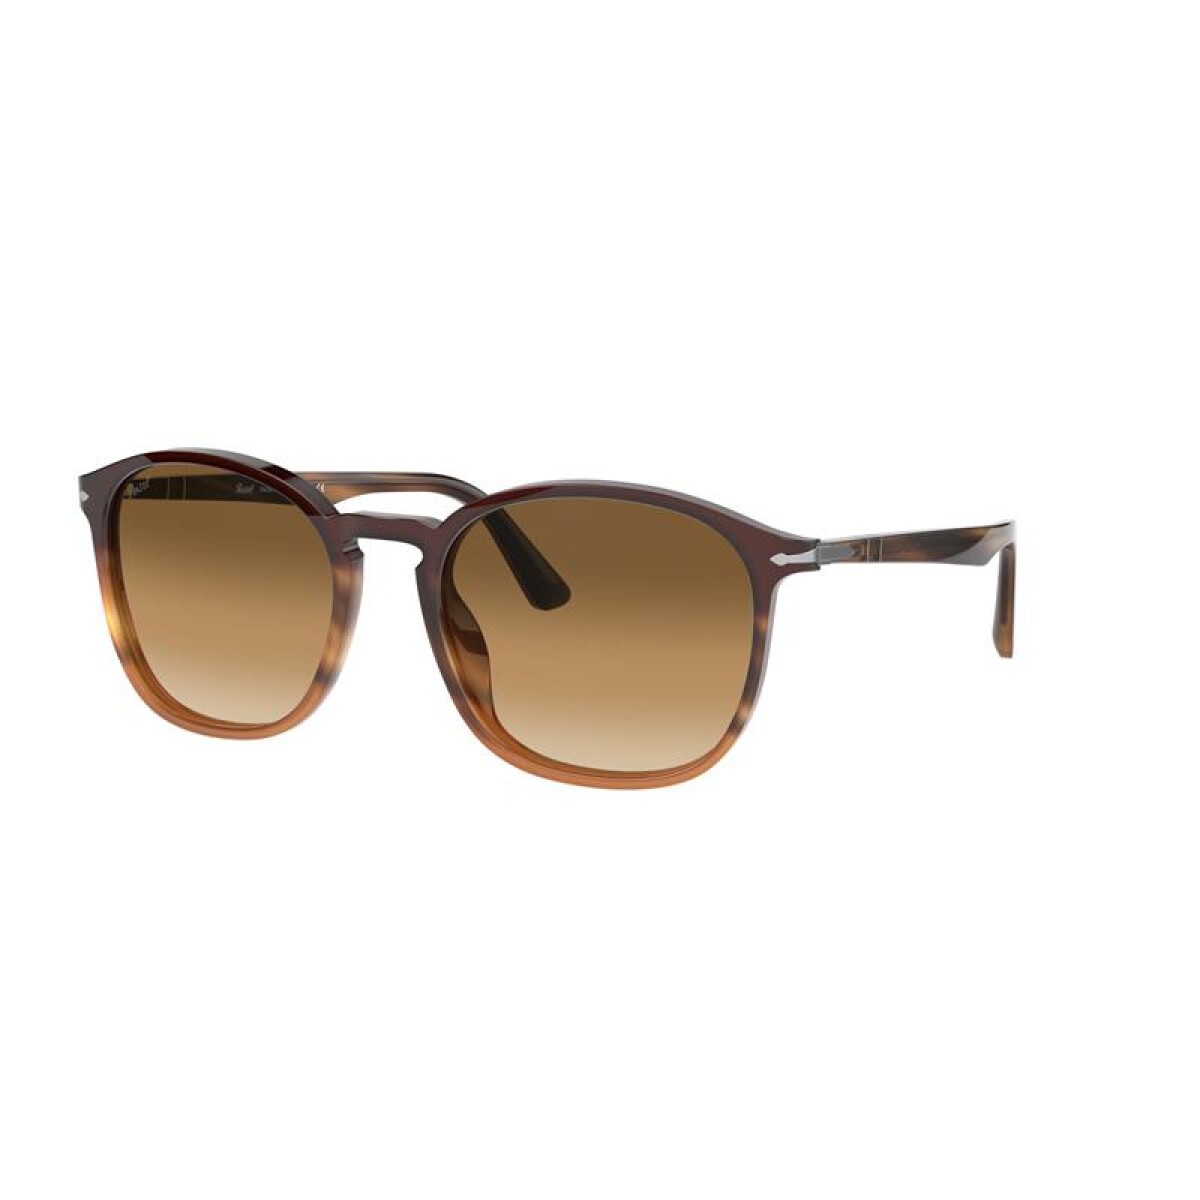 Persol 3215-s - 1136/51 